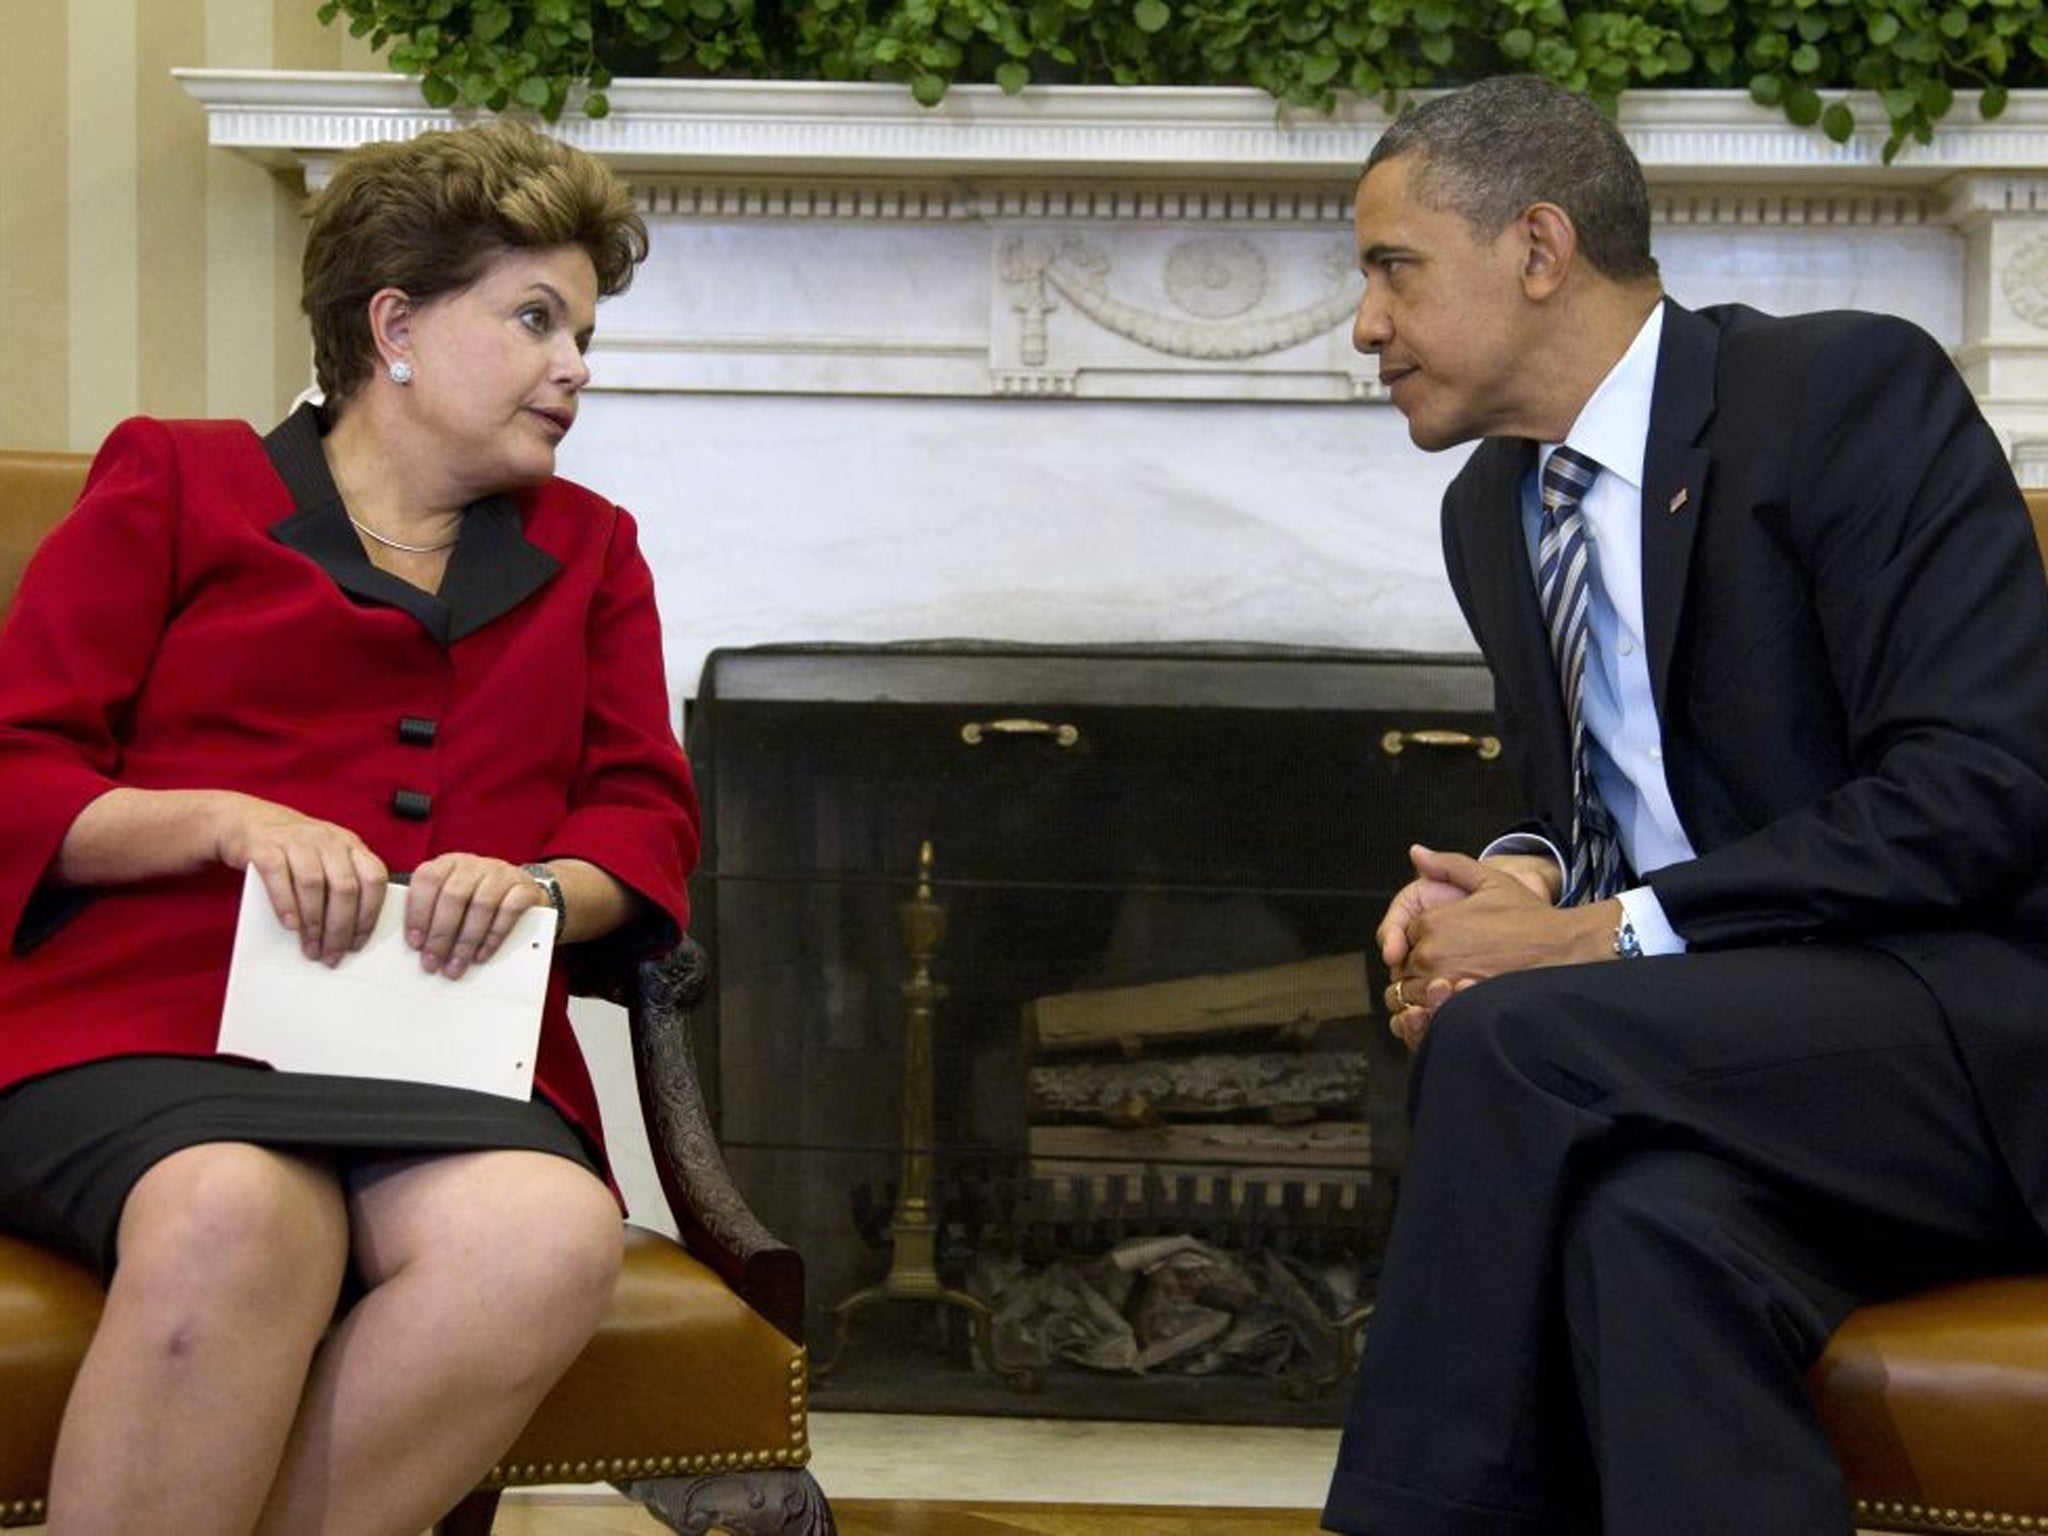 Dilma Rousseff and President Obama talking in the Oval Office in April 2012